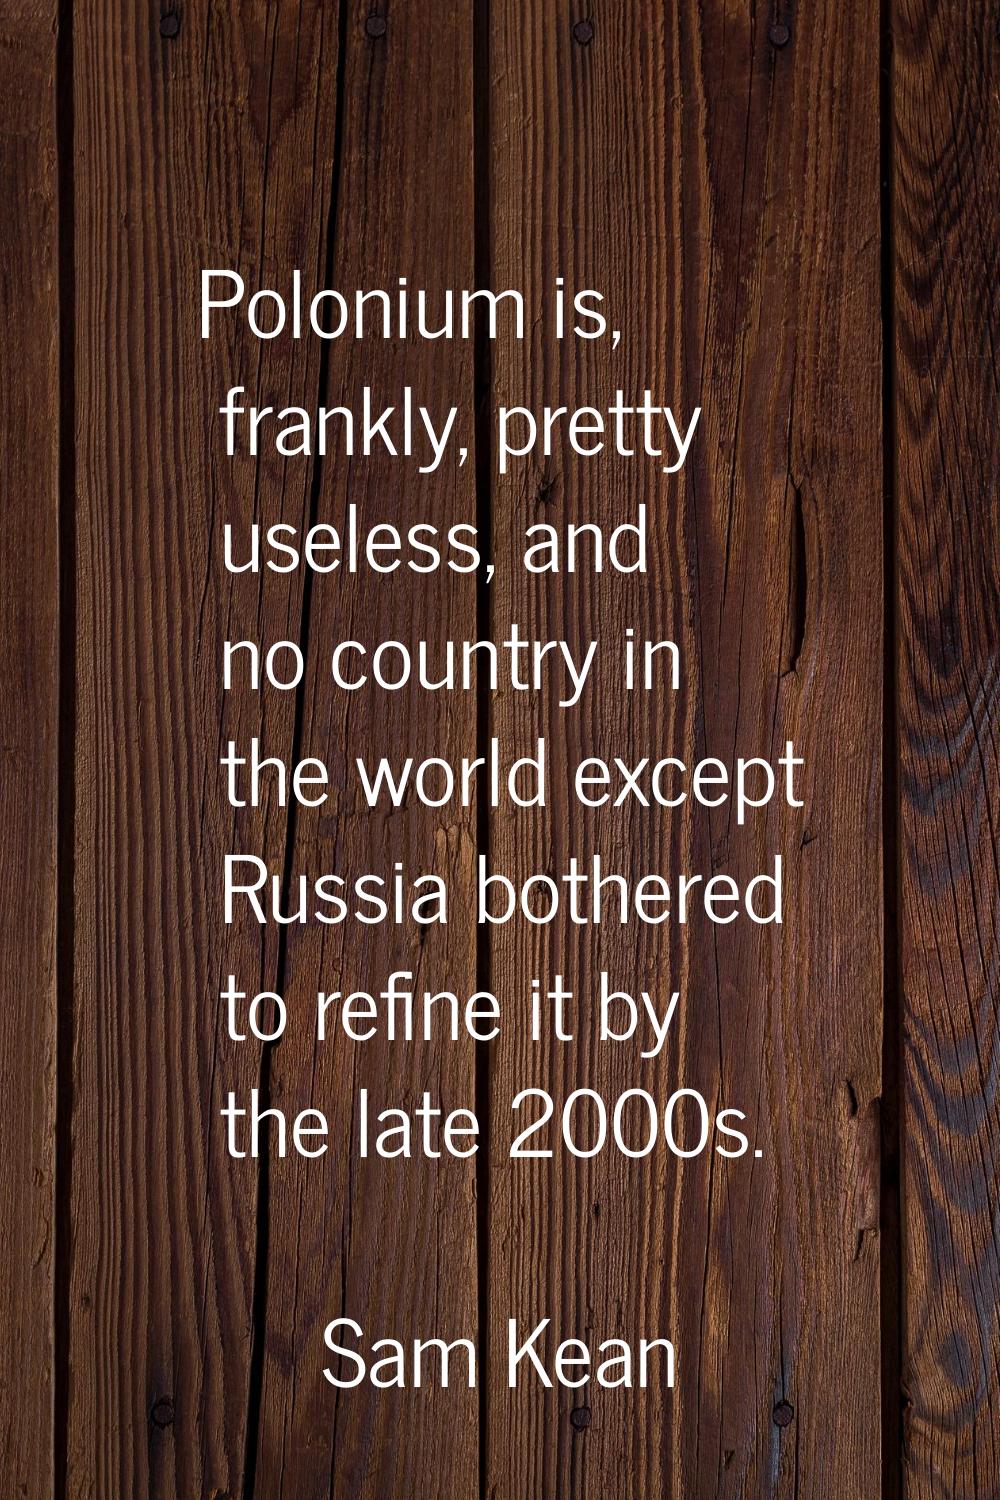 Polonium is, frankly, pretty useless, and no country in the world except Russia bothered to refine 